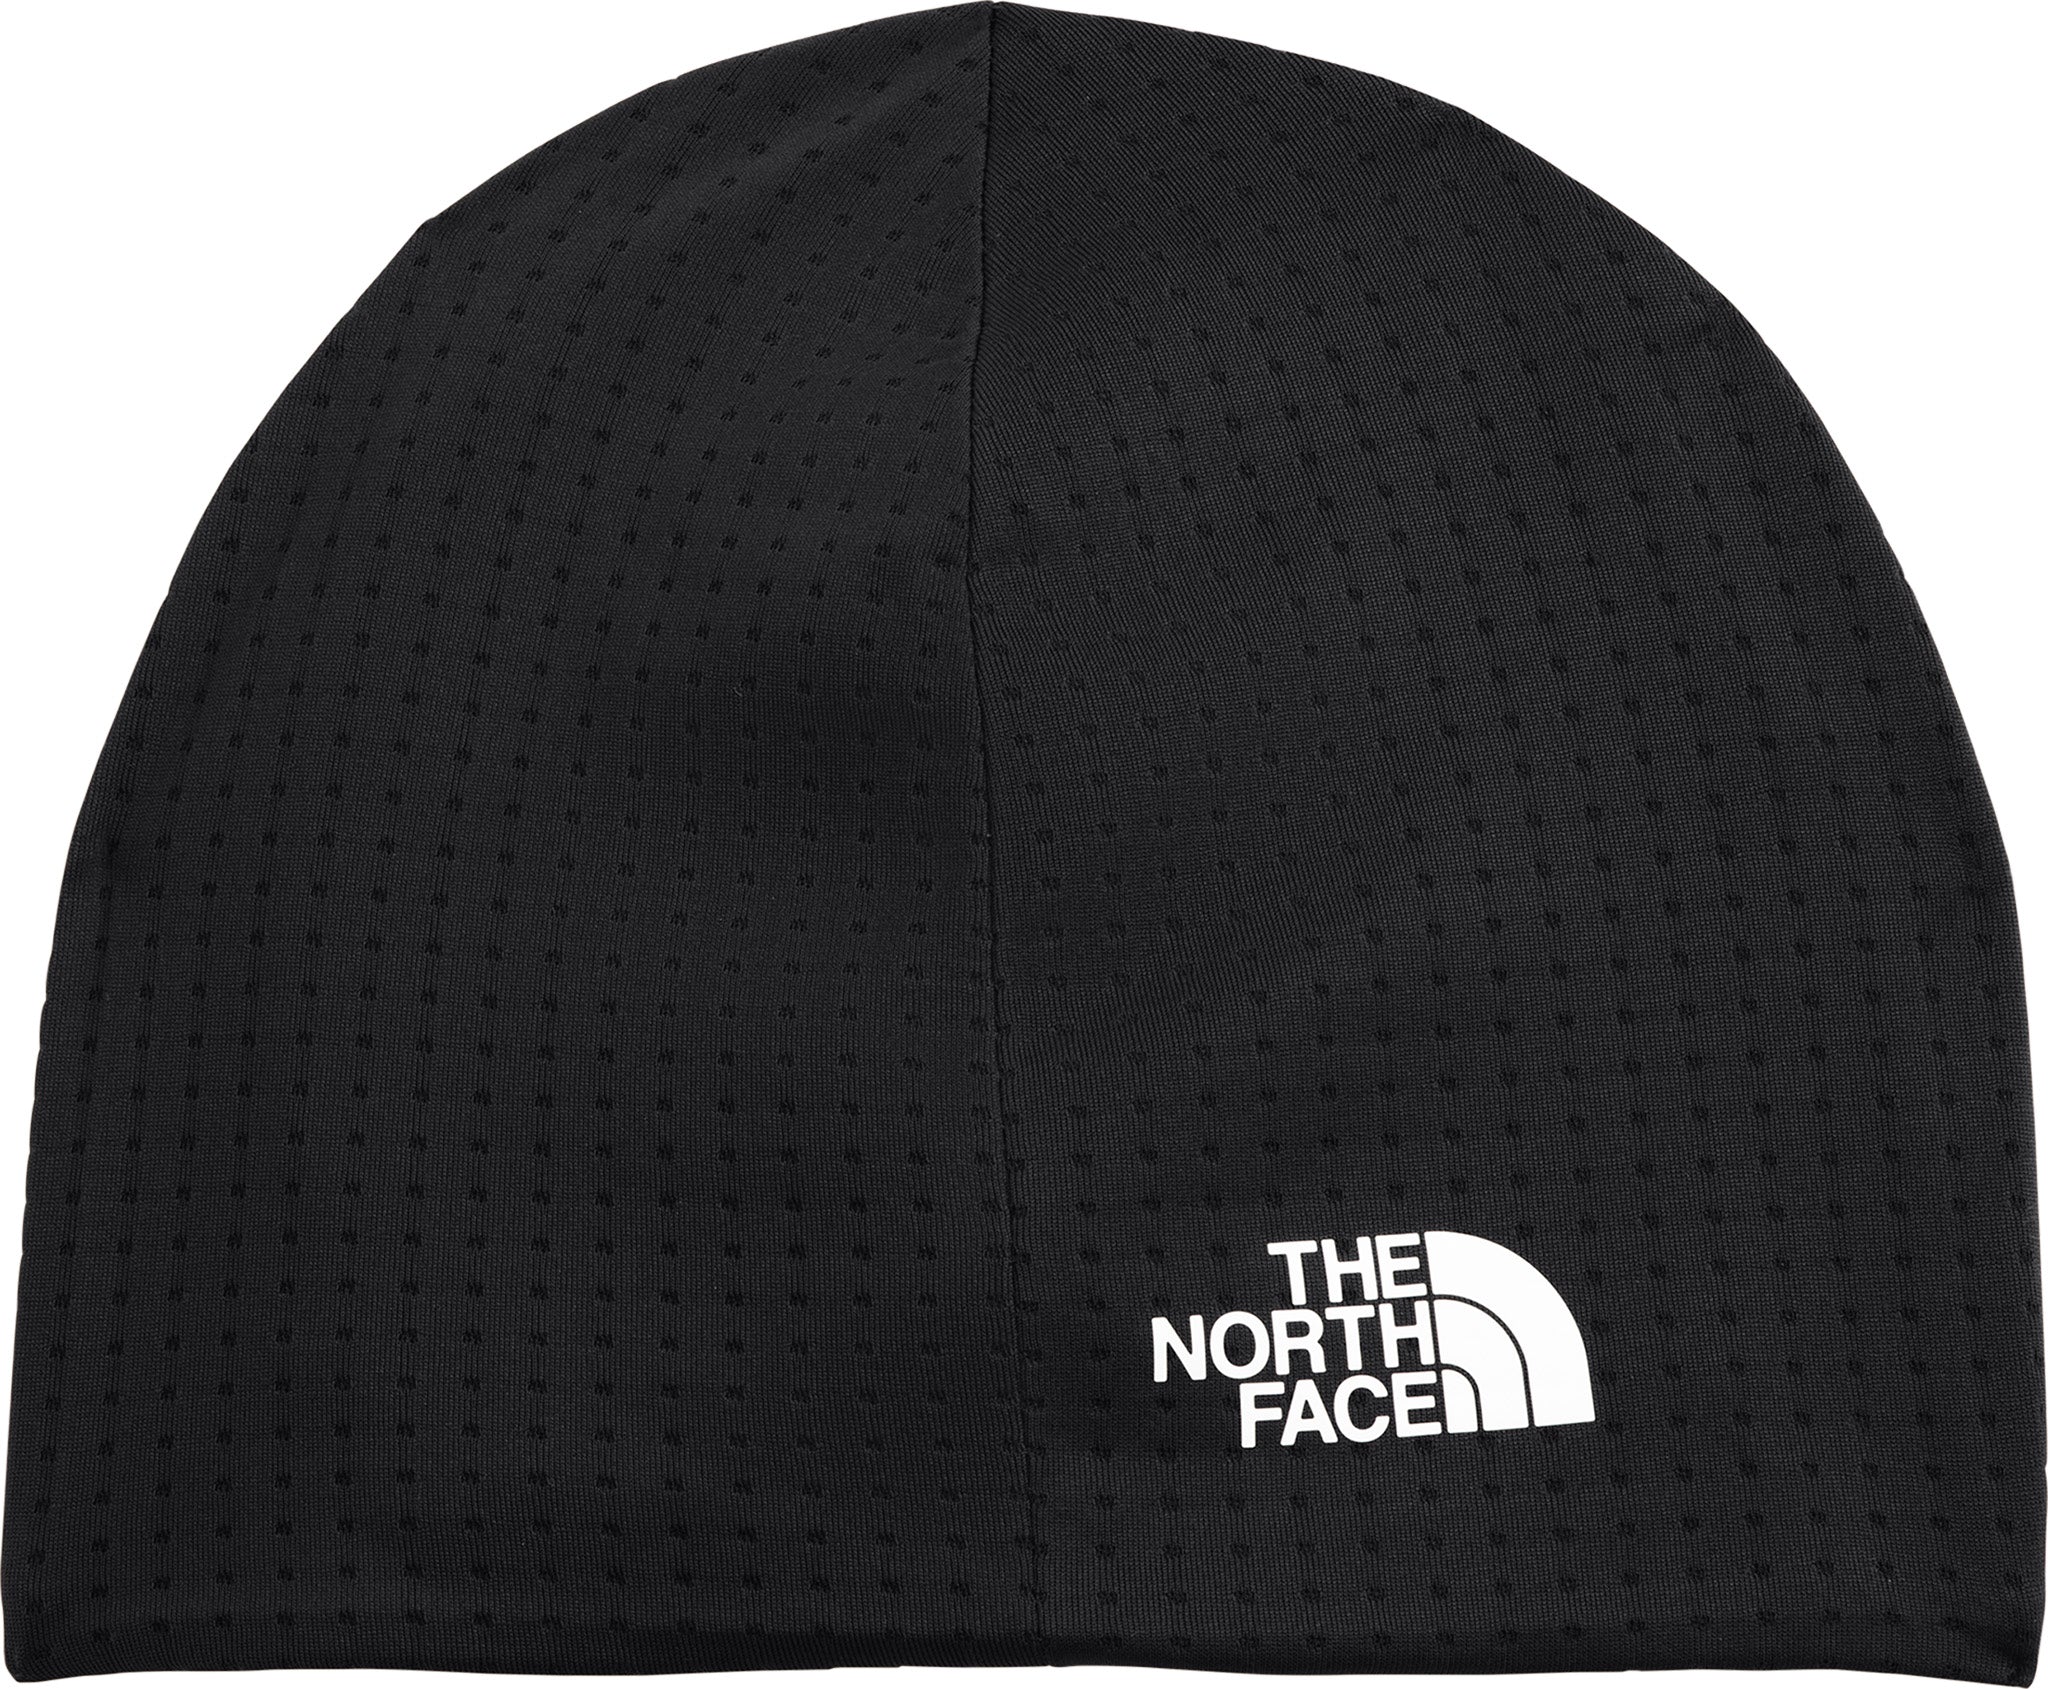 The North Face Fastech Beanie - Unisex | Altitude Sports